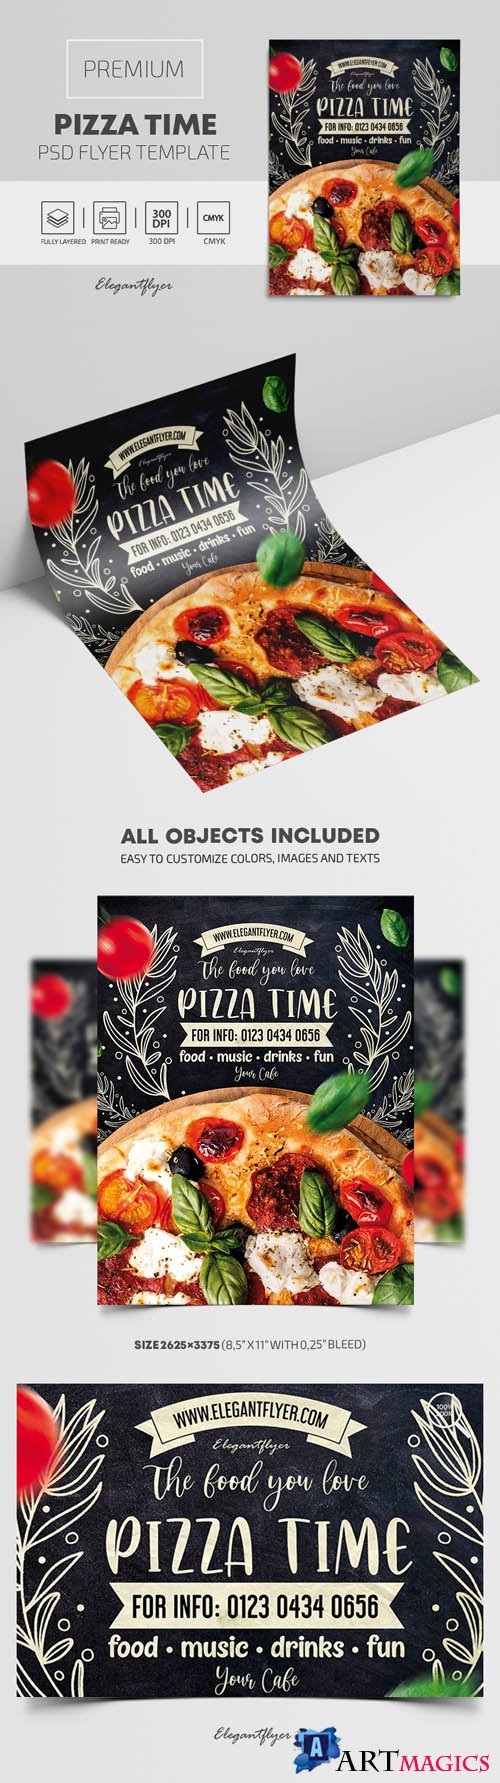 Pizza Time Premium PSD Flyer Template